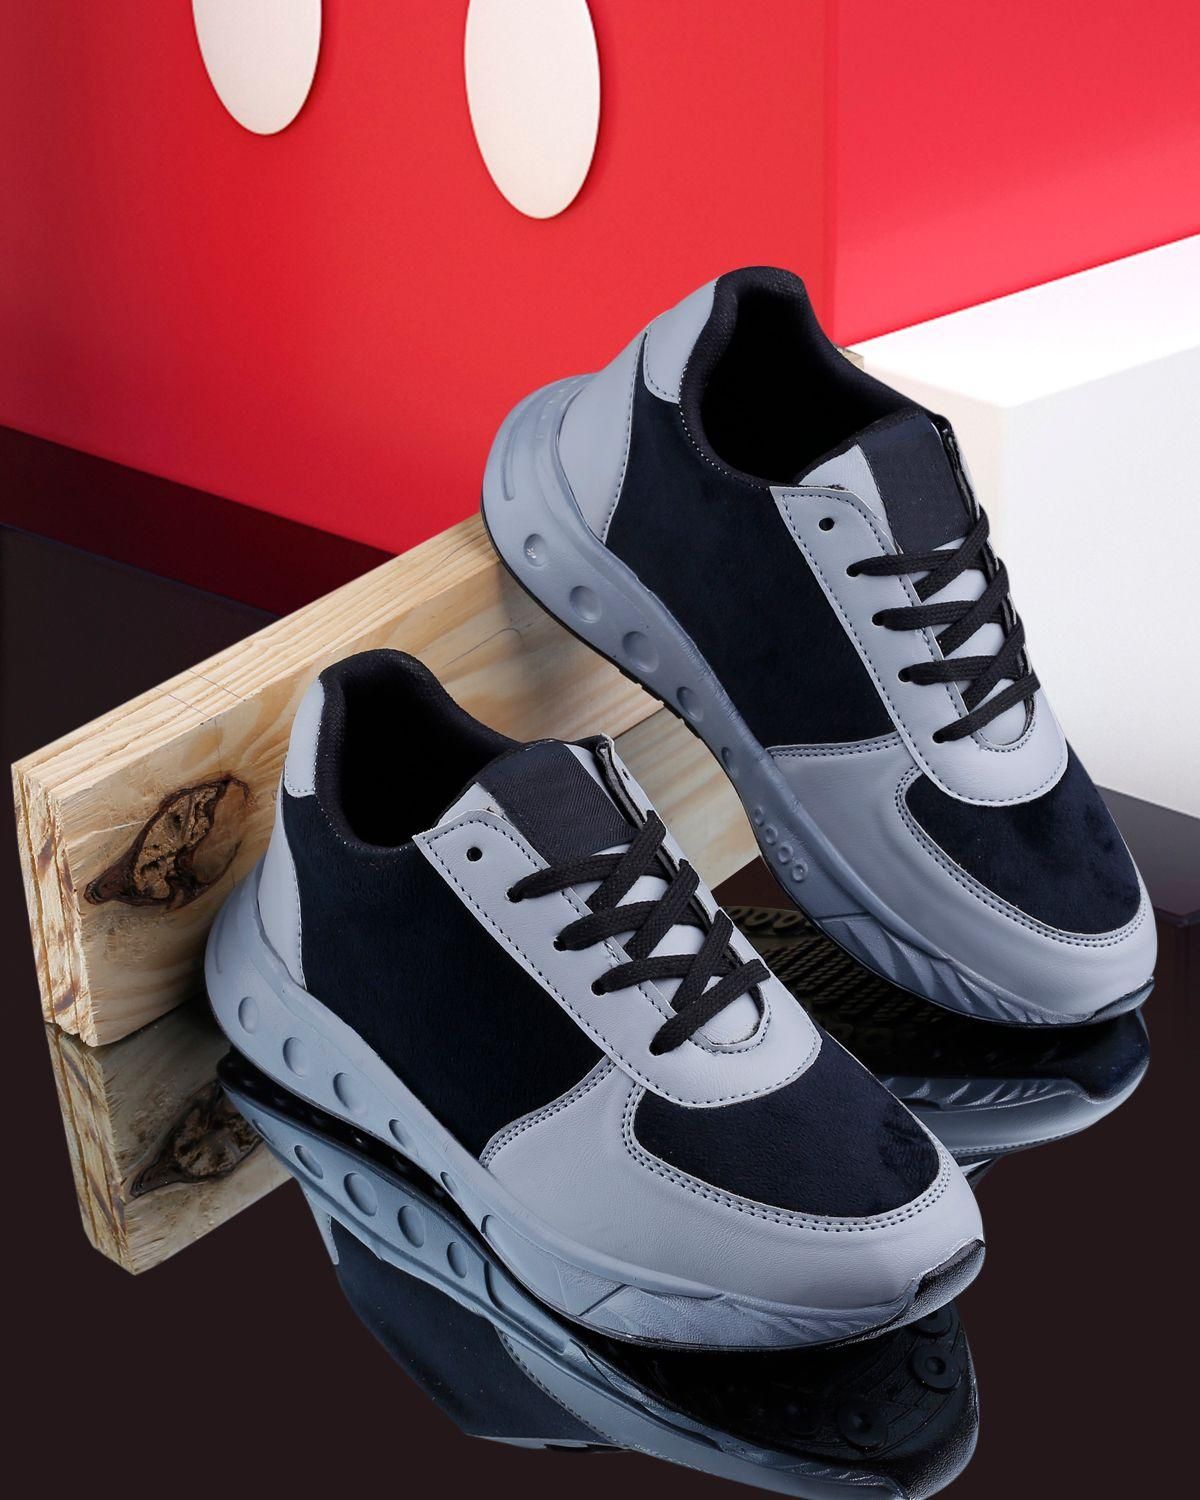 Men's Synthetic Sole Lace Up Casual Shoes